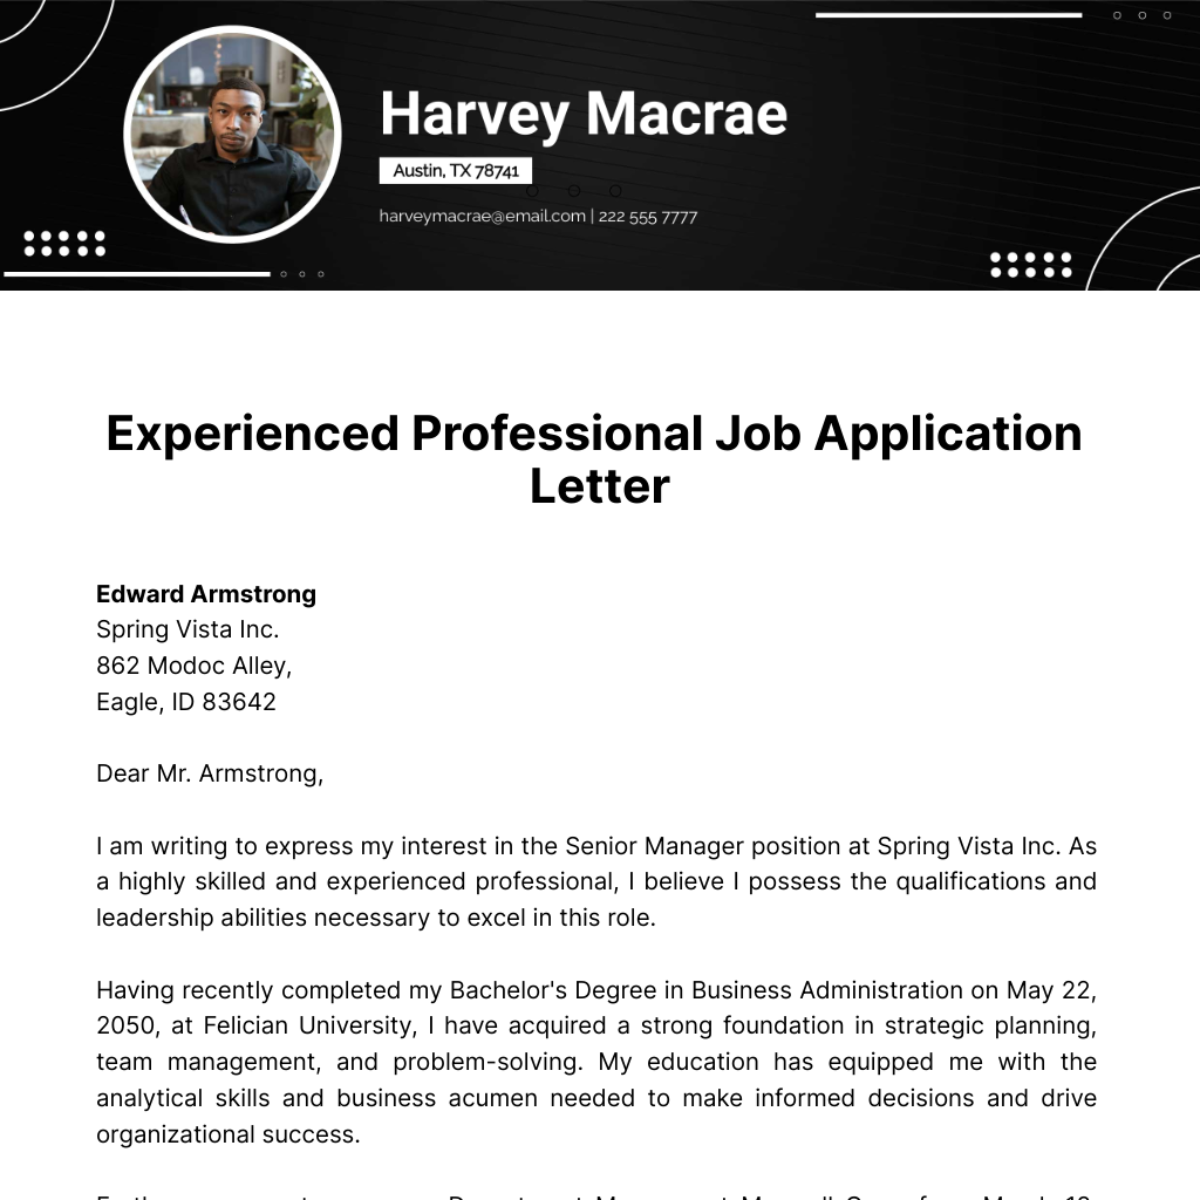 Experienced Professional Job Application Letter  Template